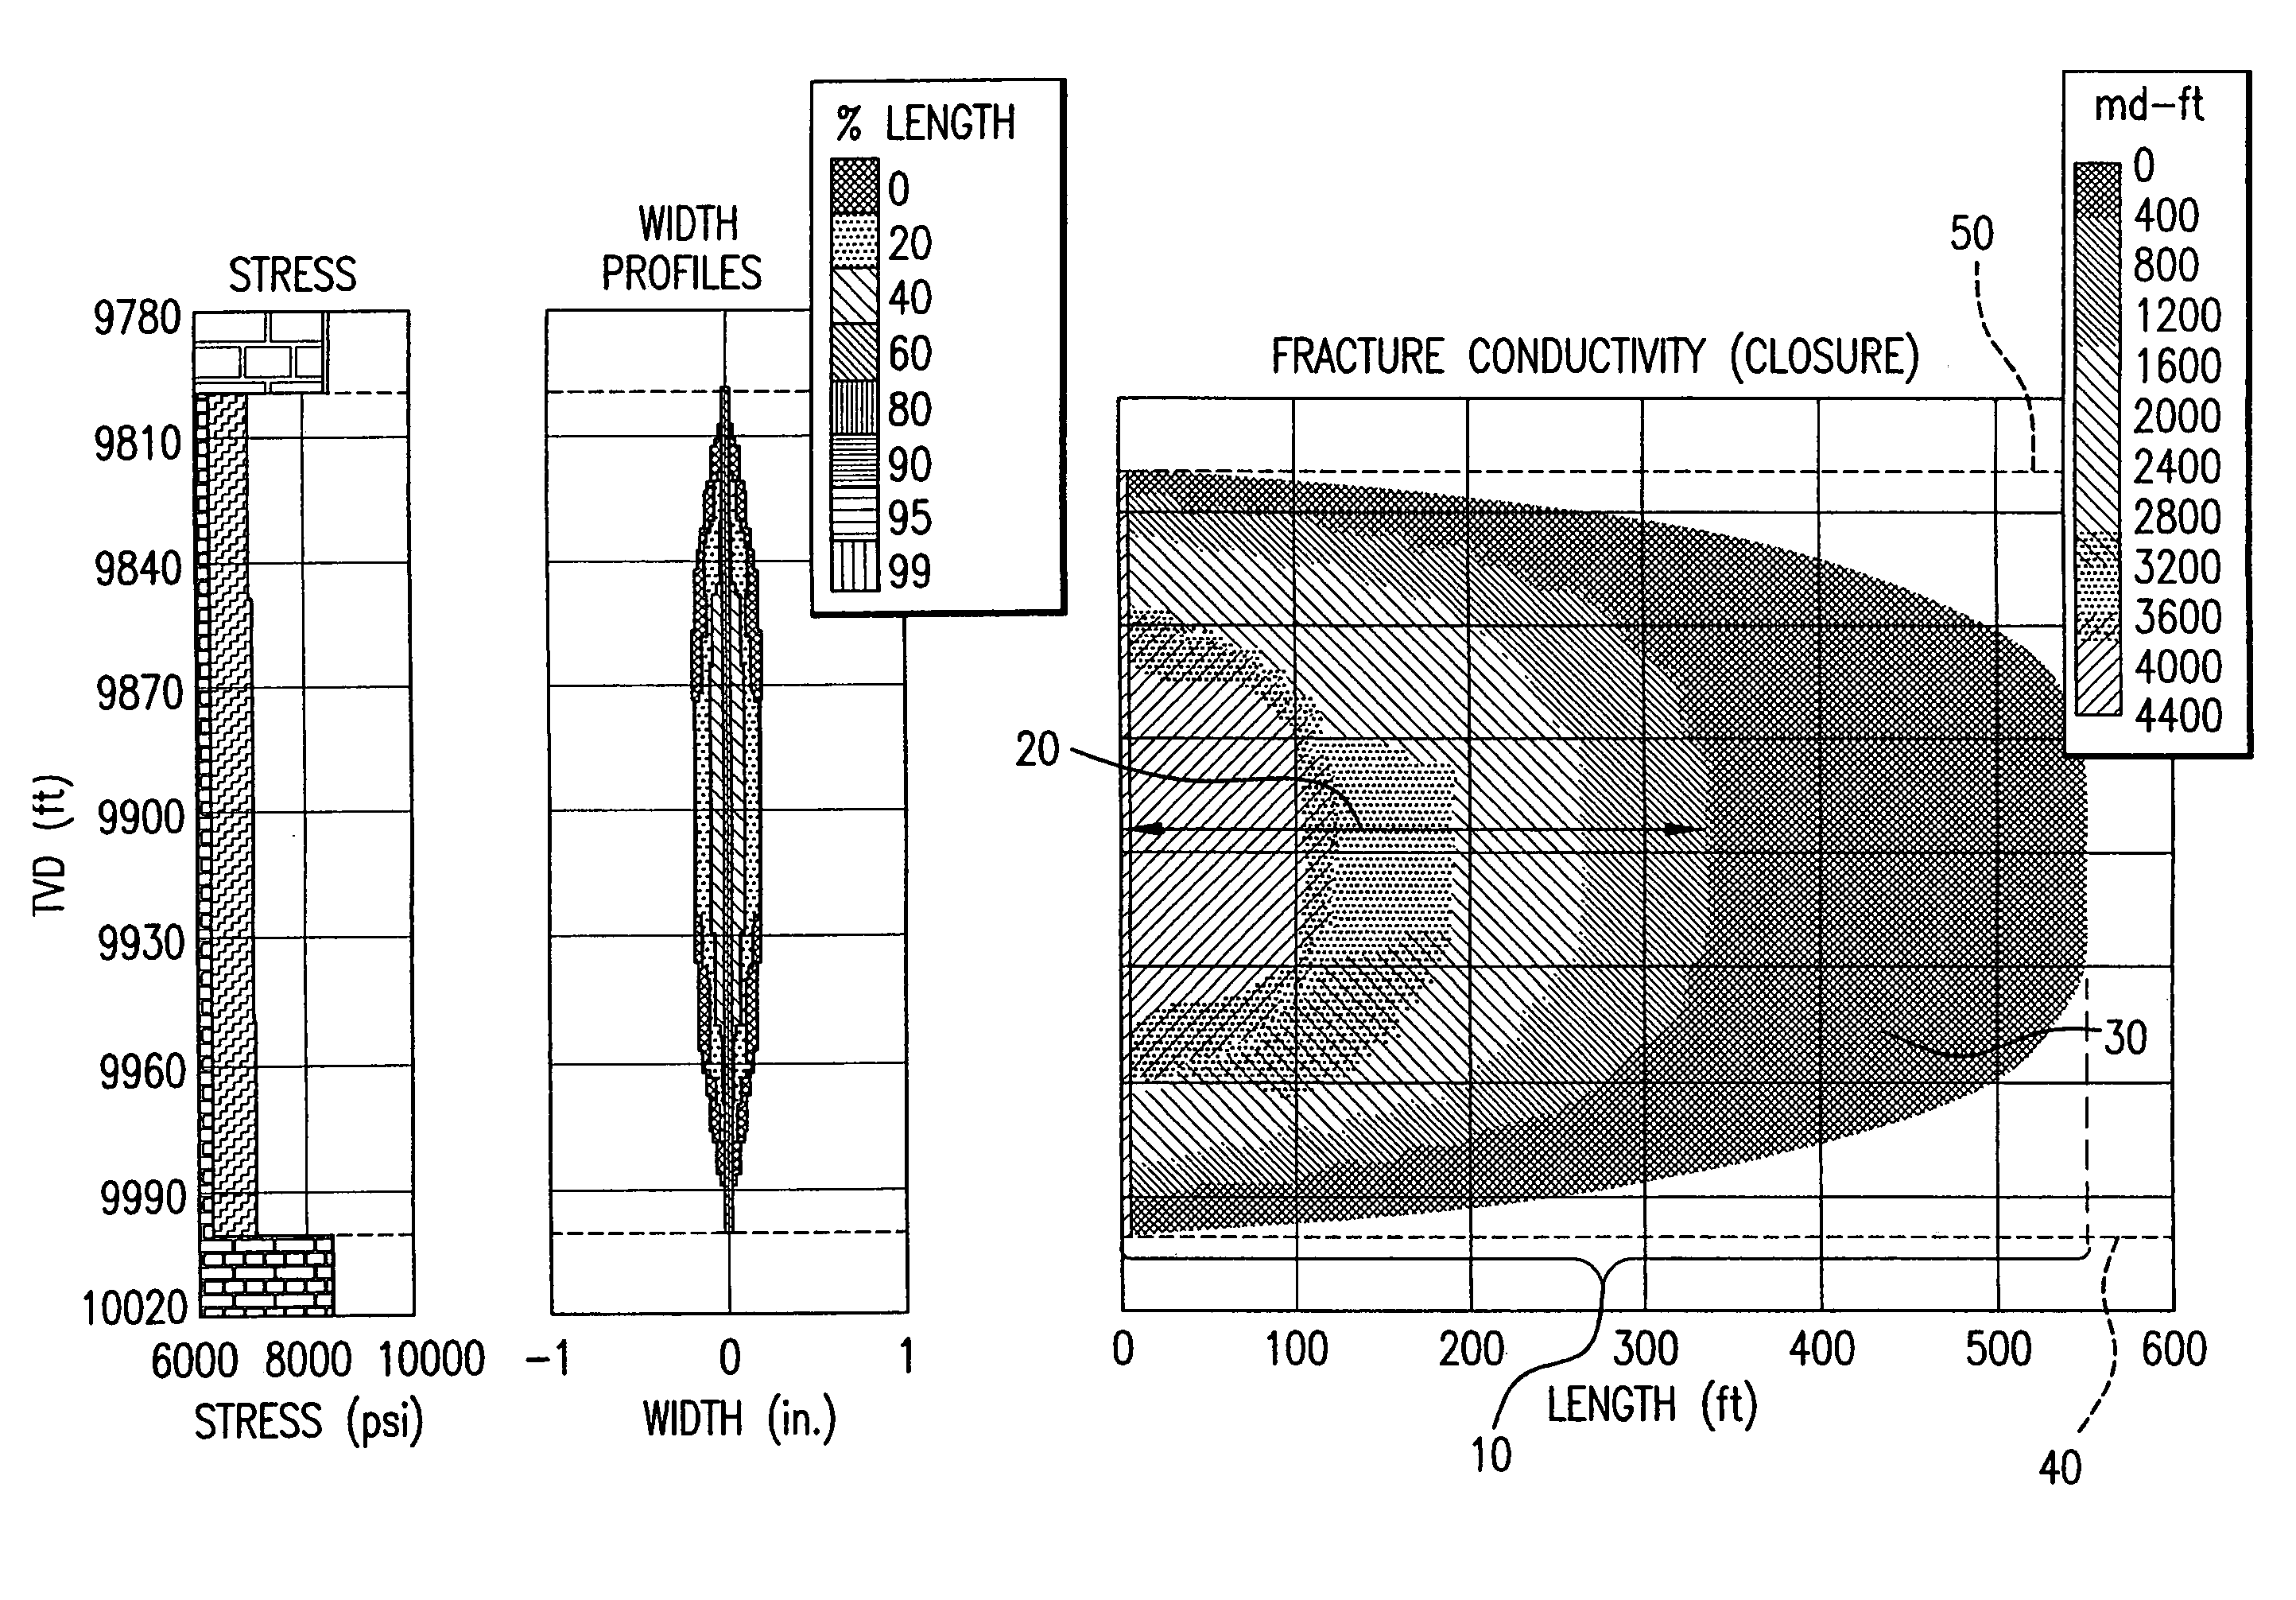 Method of treatment subterranean formations using multiple proppant stages or mixed proppants